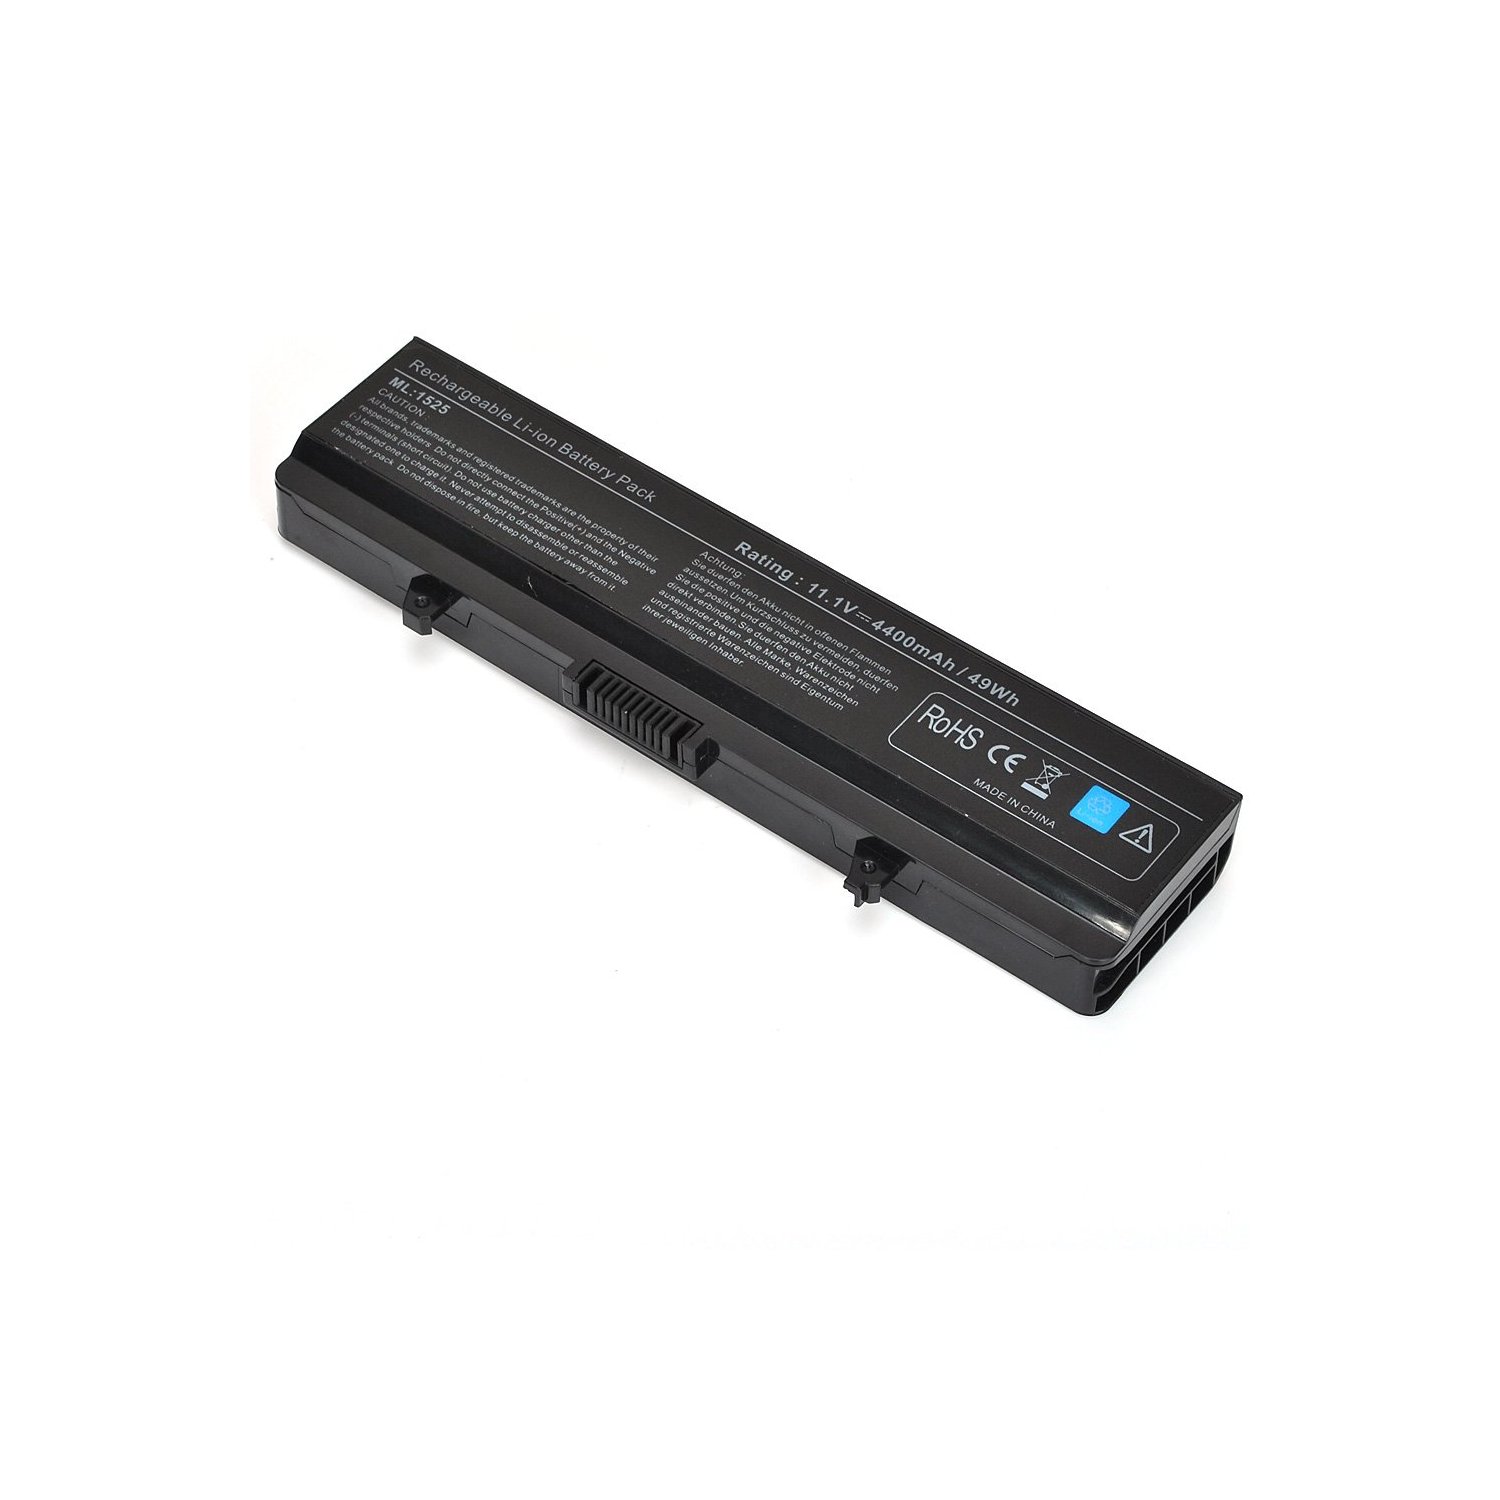 Dell-1526-6 cell: Laptop Battery 6-cell for Dell Inspiron 1525 1526 1545